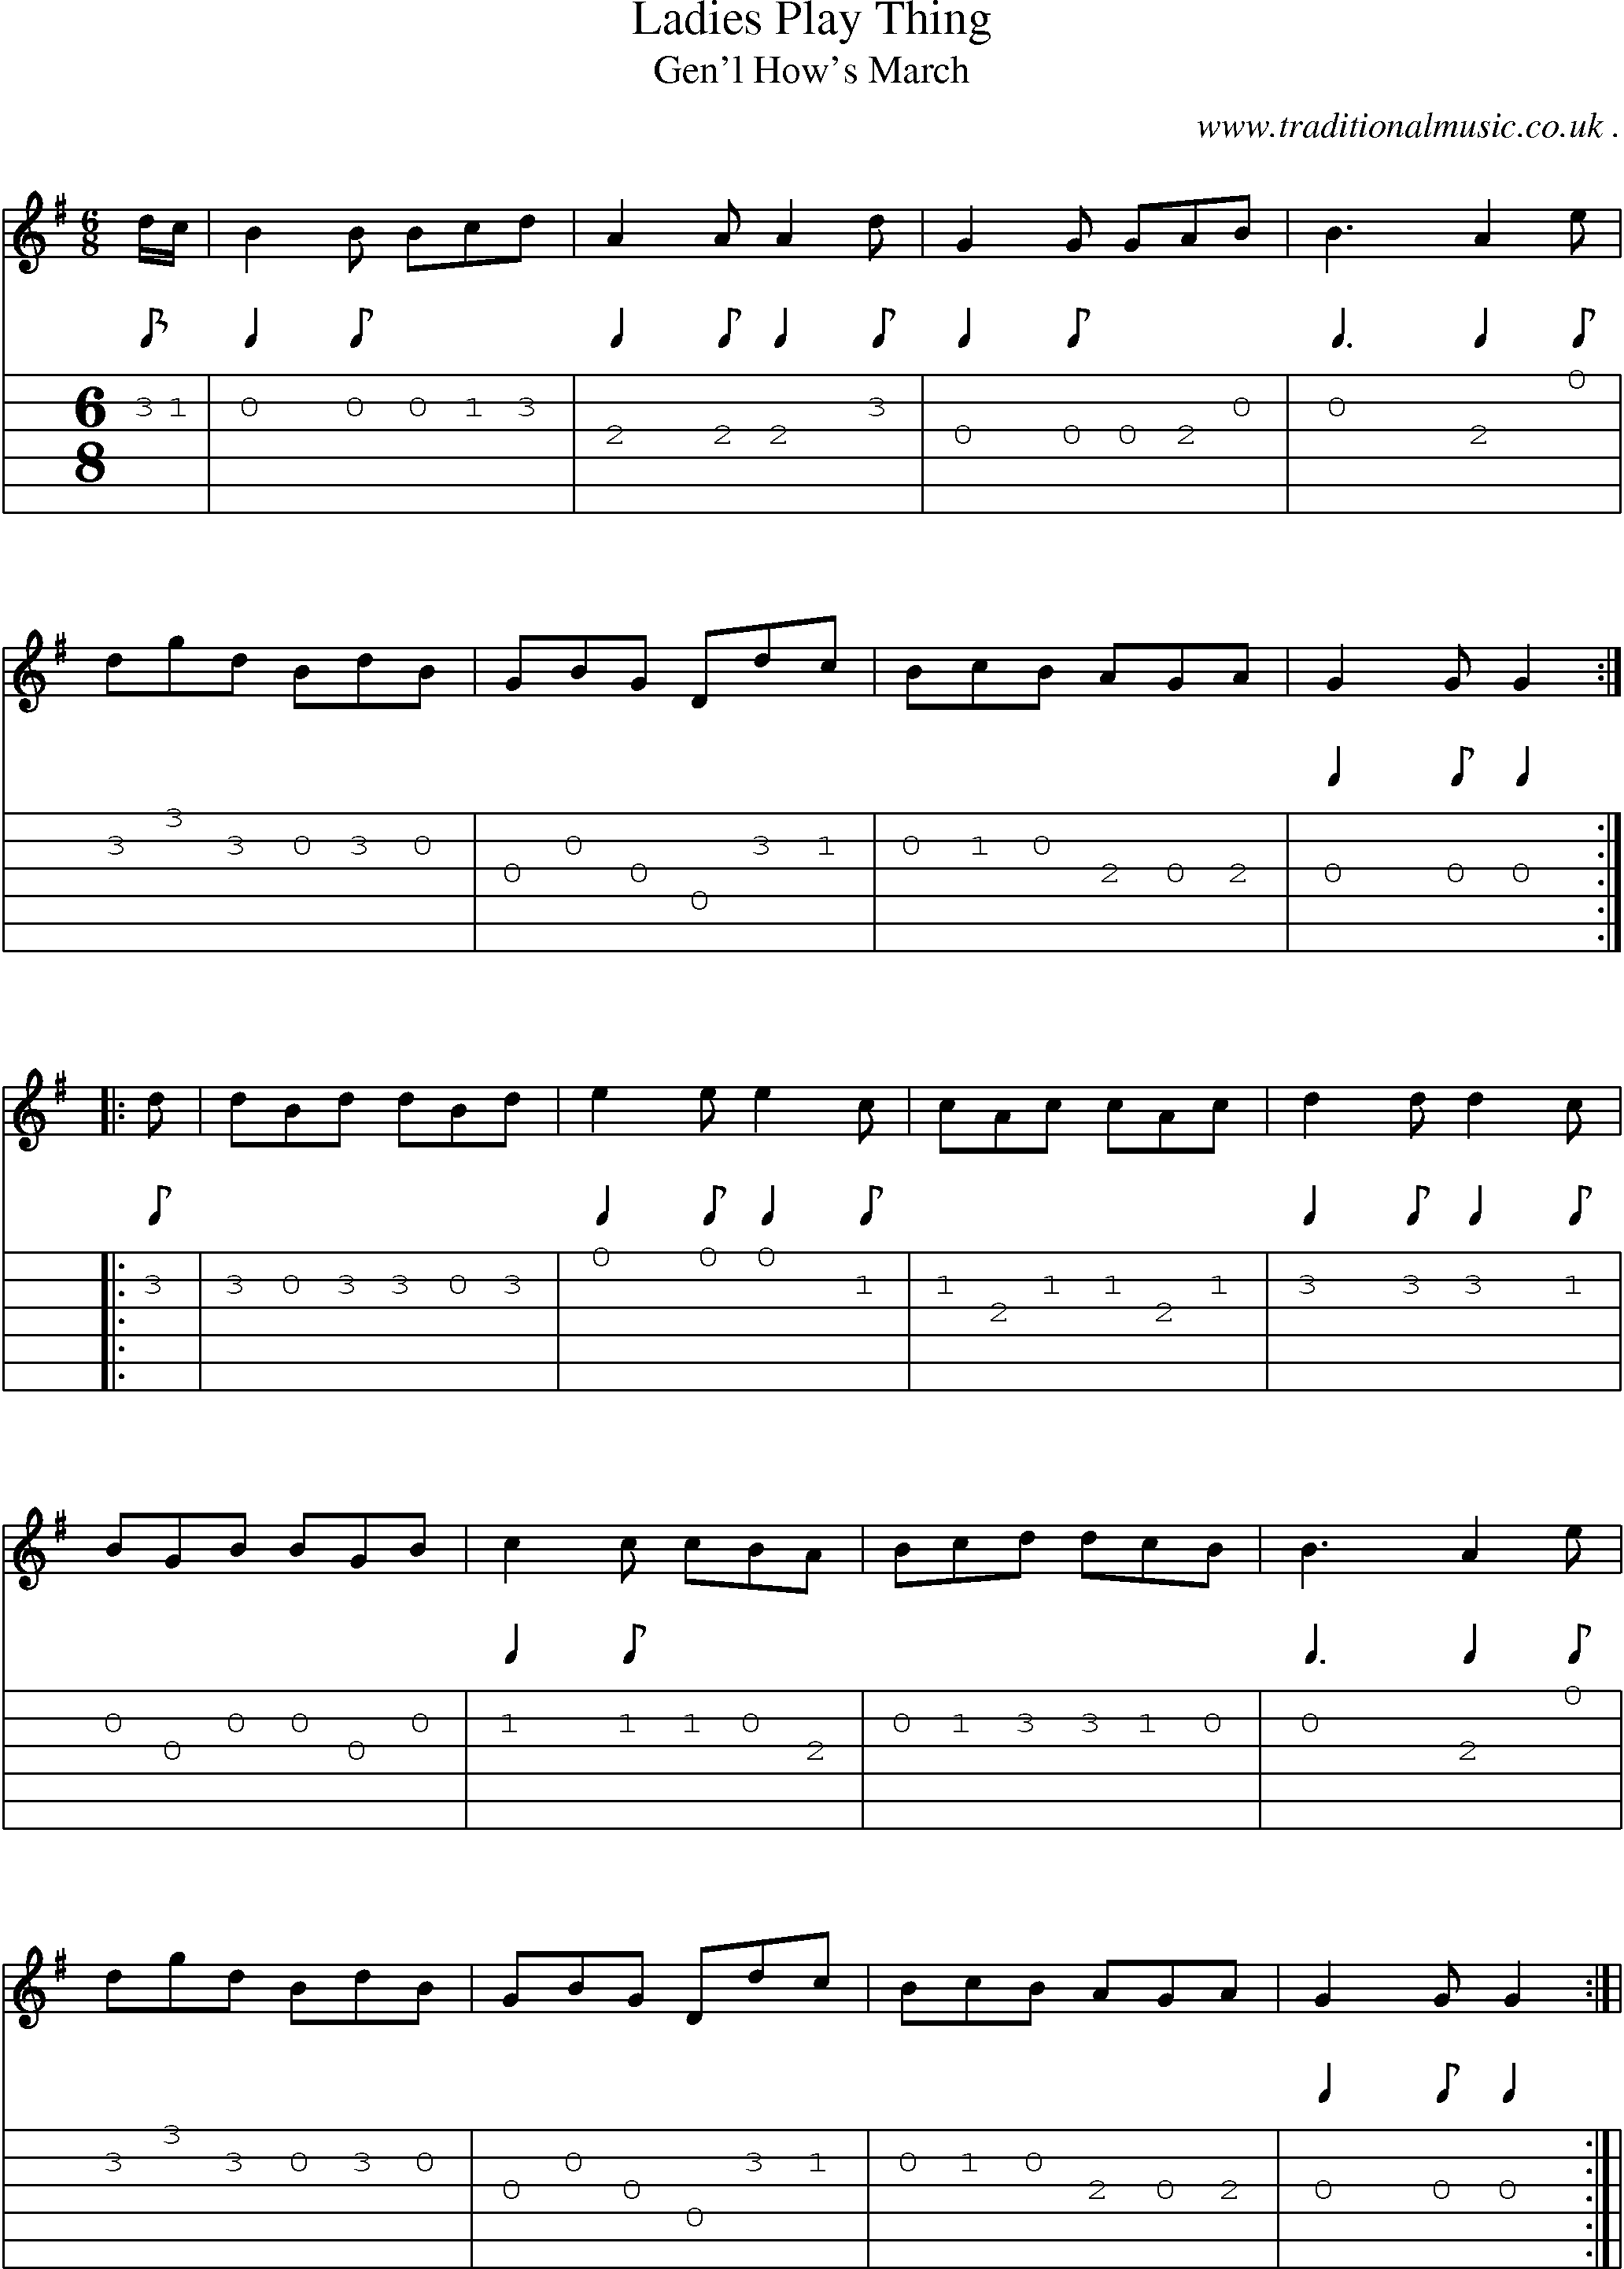 Sheet-Music and Guitar Tabs for Ladies Play Thing